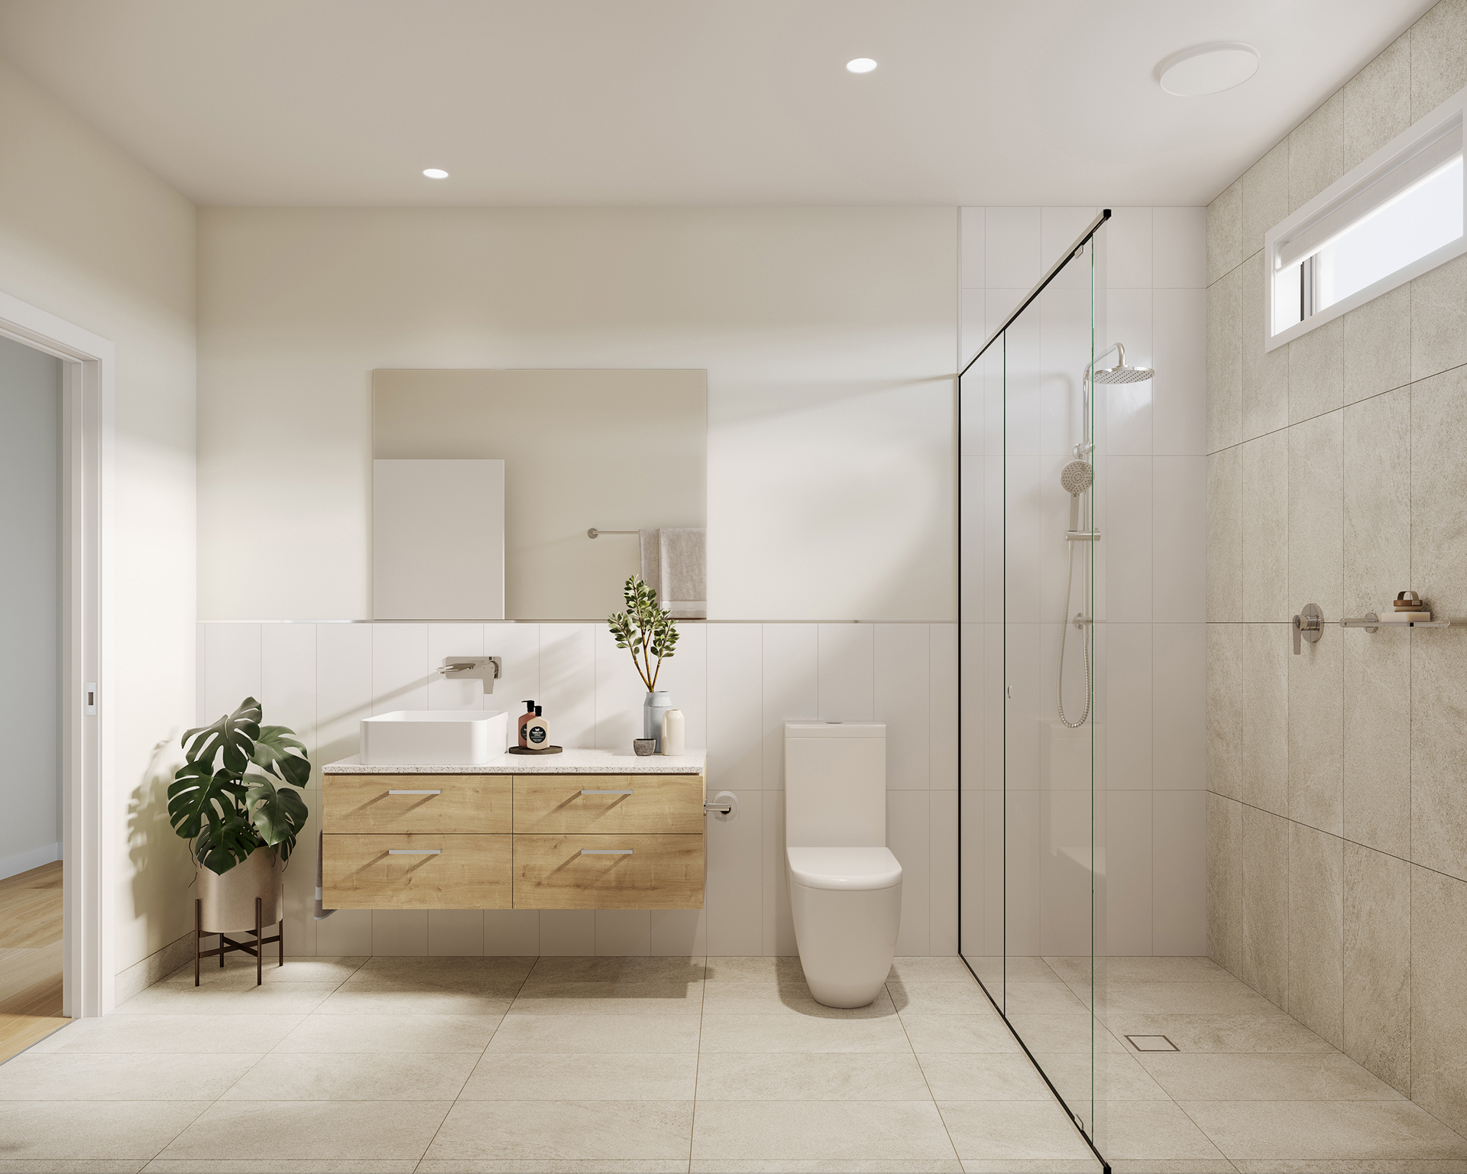 VH03 render for Bathroom in Country colour